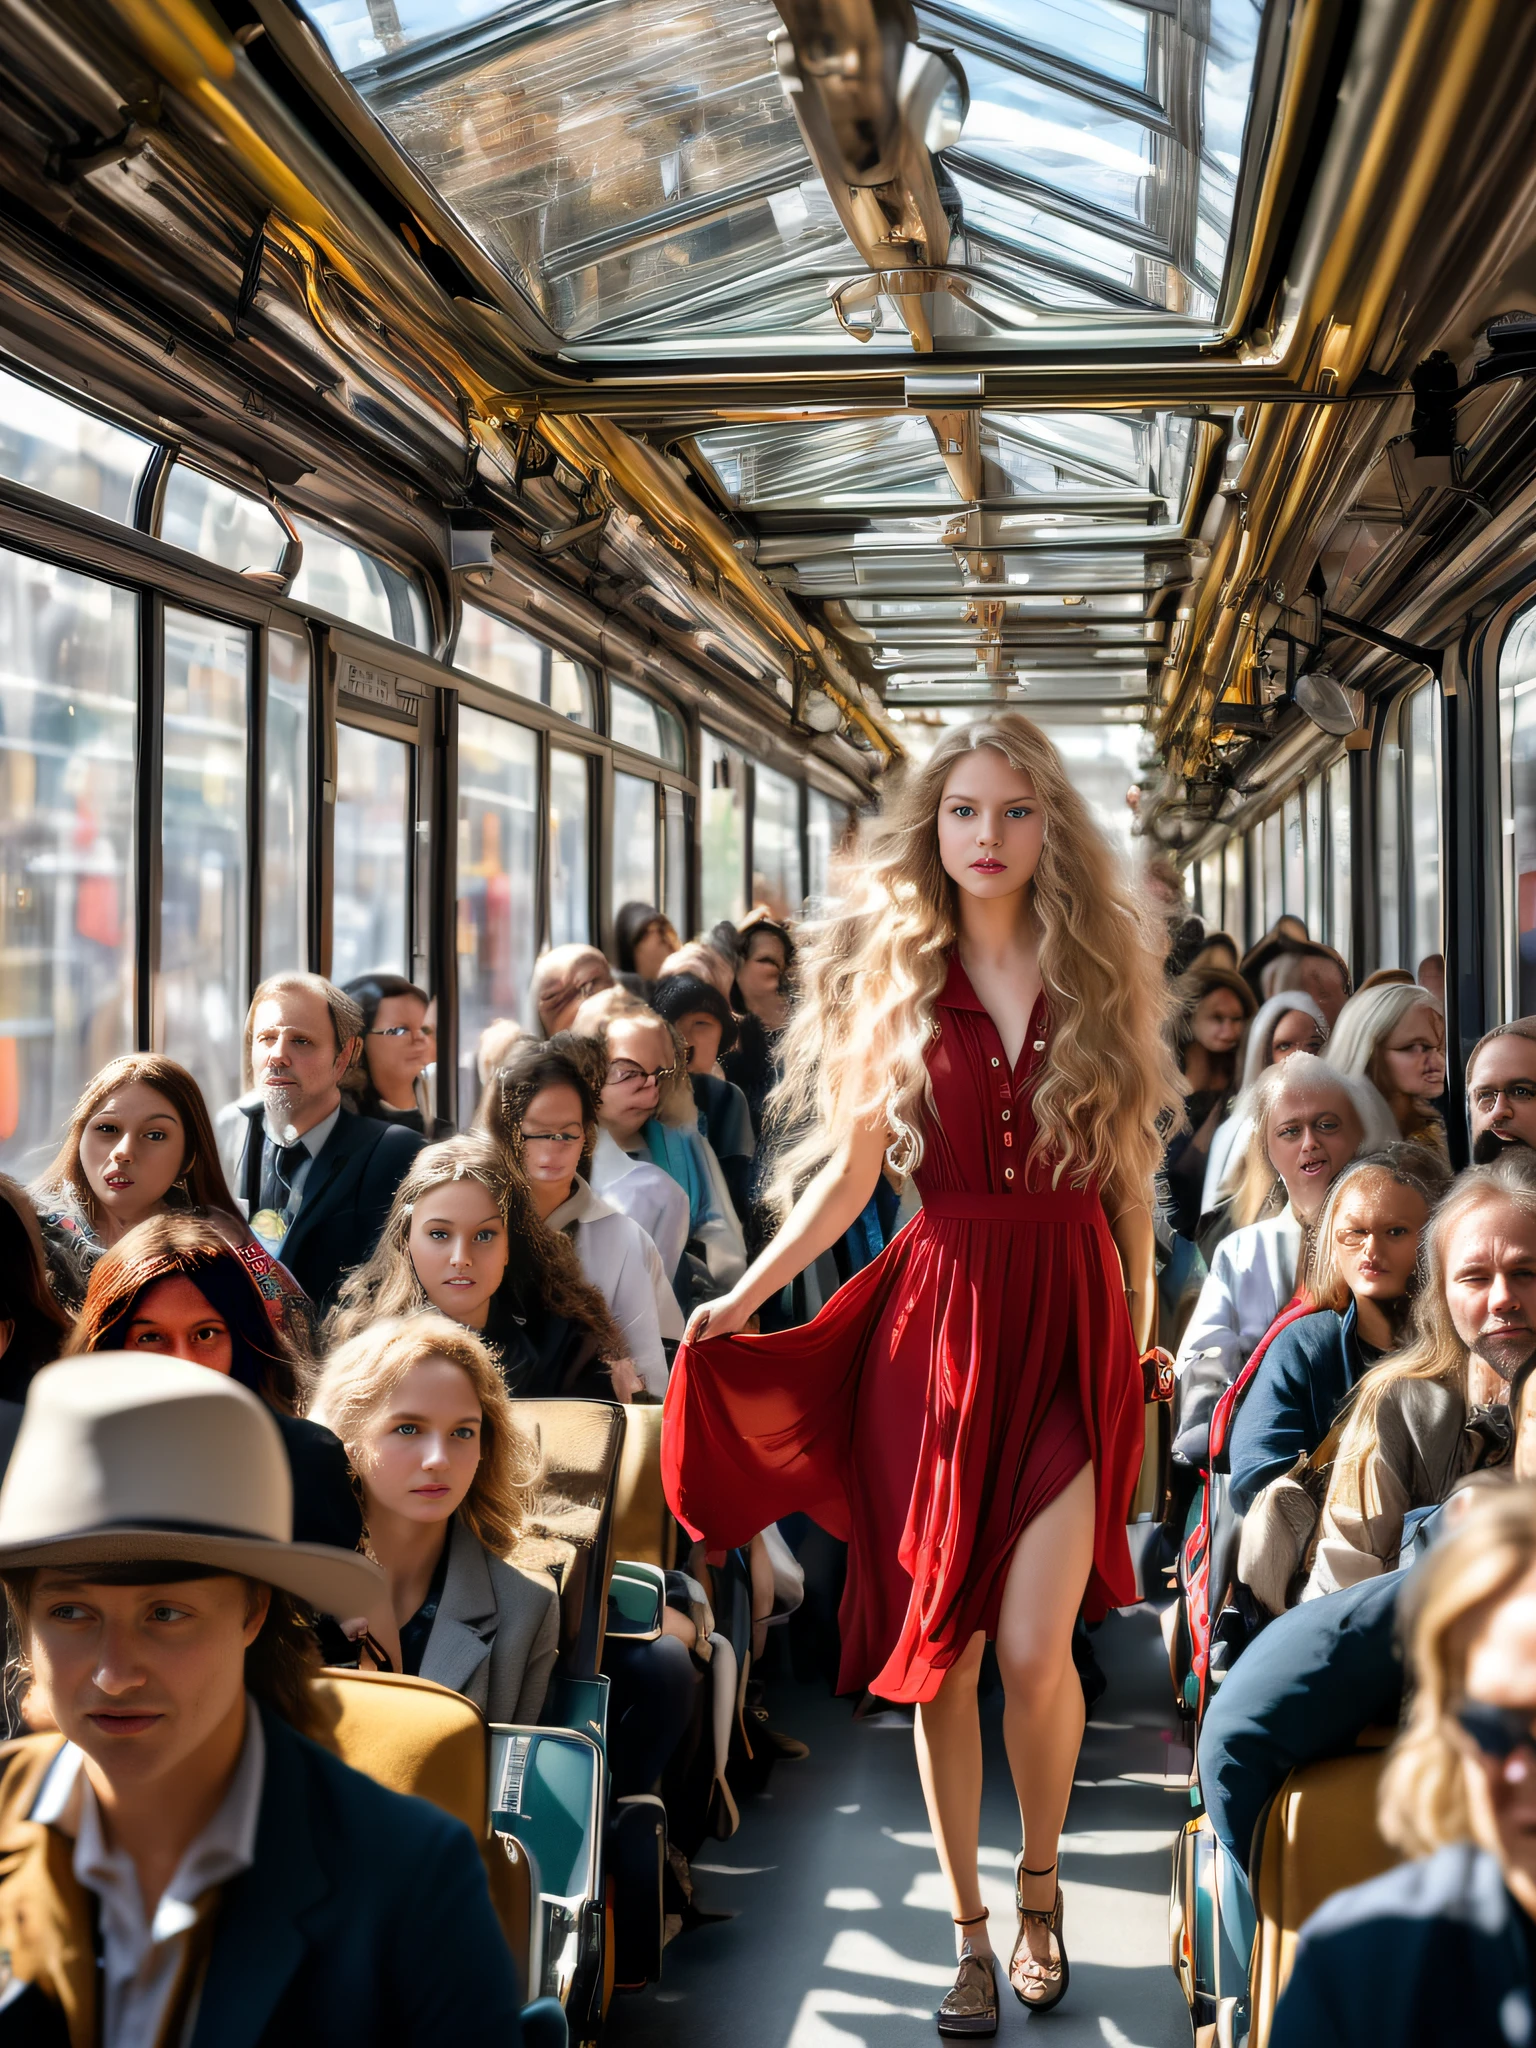 (best quality,8k,HDR:1.2),ultra-realistic,beautiful well-proportioned woman riding on a train standing in the middle of a crowd,depth of field,perfect face, perfect hands,hyper definition, vibrant colors,long golden hair flowing in the wind,sparkling green eyes,rosy cheeks,delicate eyelashes,lustrous lips,wearing a stylish red dress,conﬁdent and graceful posture,engrossed in a book,people around her wearing diverse clothing and expressions in a busy train station,sunlight streaming through the windows,casting warm rays of light on the scene